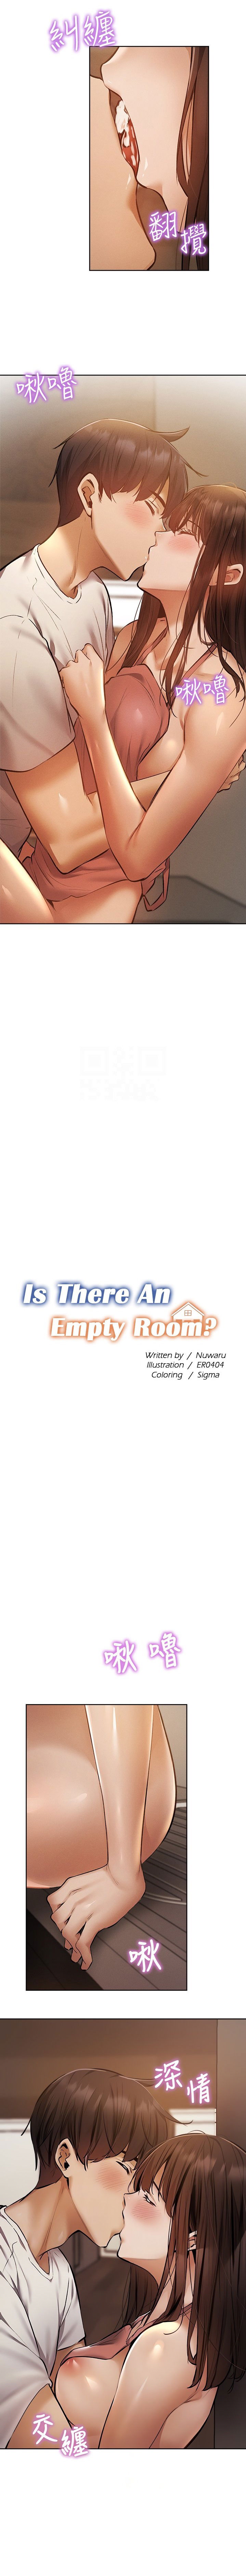 is-there-an-empty-room-chap-55-1